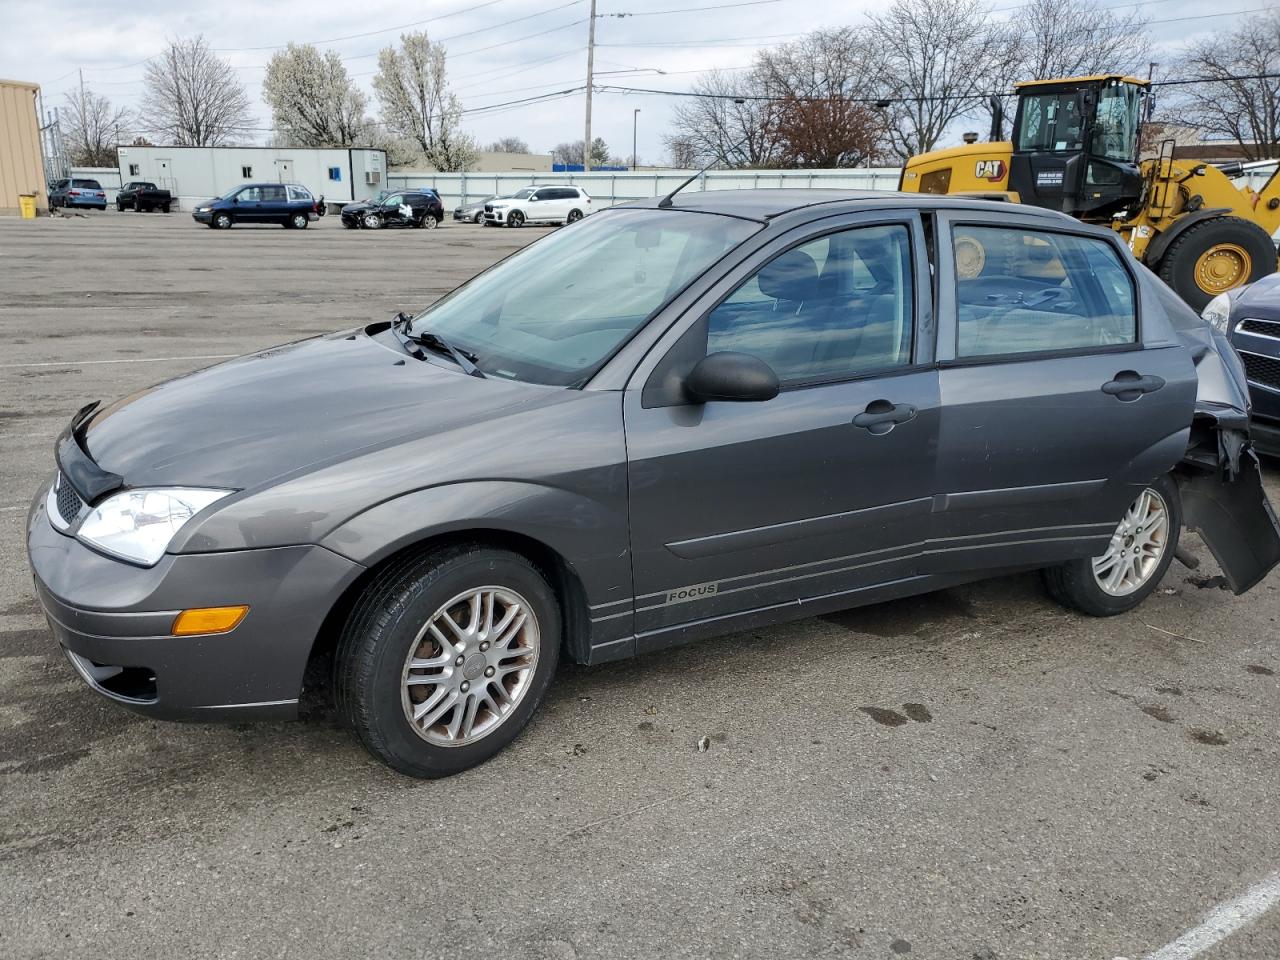 Buy 2007 Ford Focus Zx4 2.0L 1FAFP34N27W****** from USA Auctions 